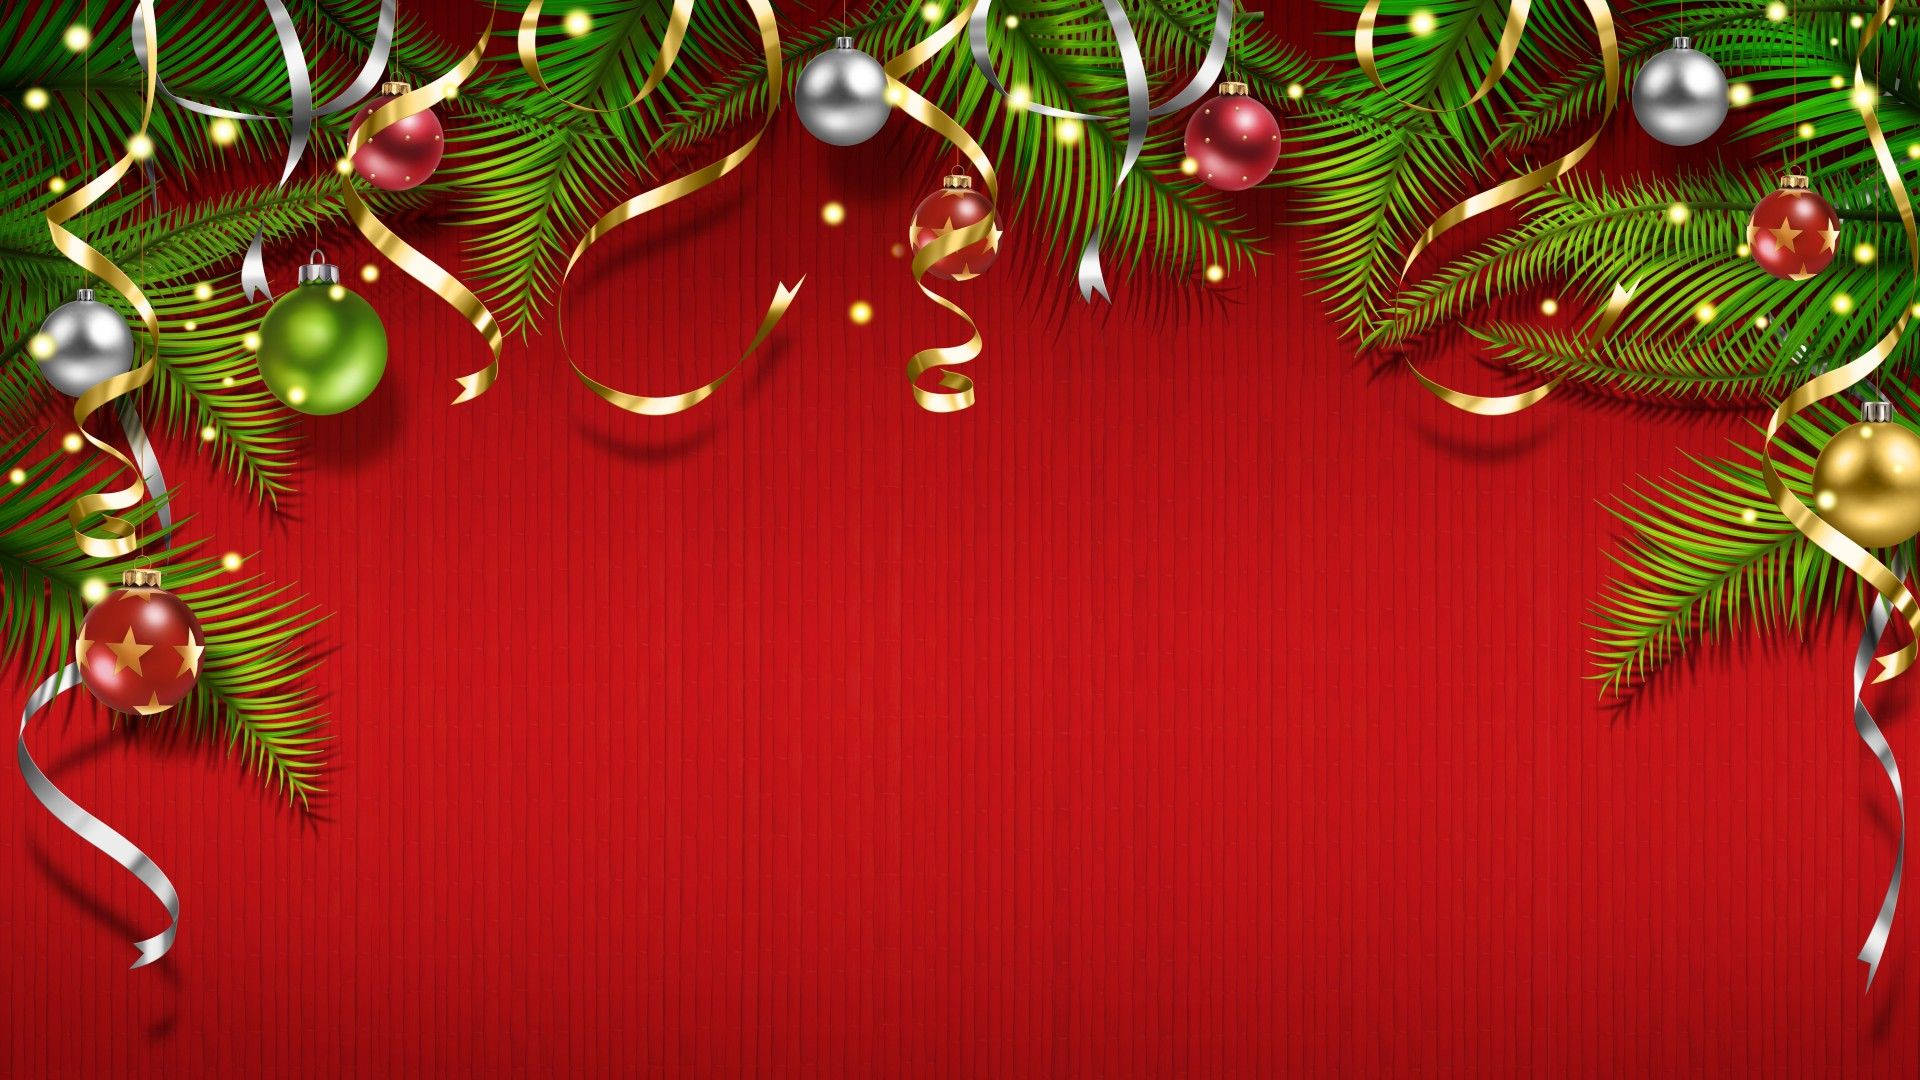 'wishing You A Holly, Jolly Christmas!' Background